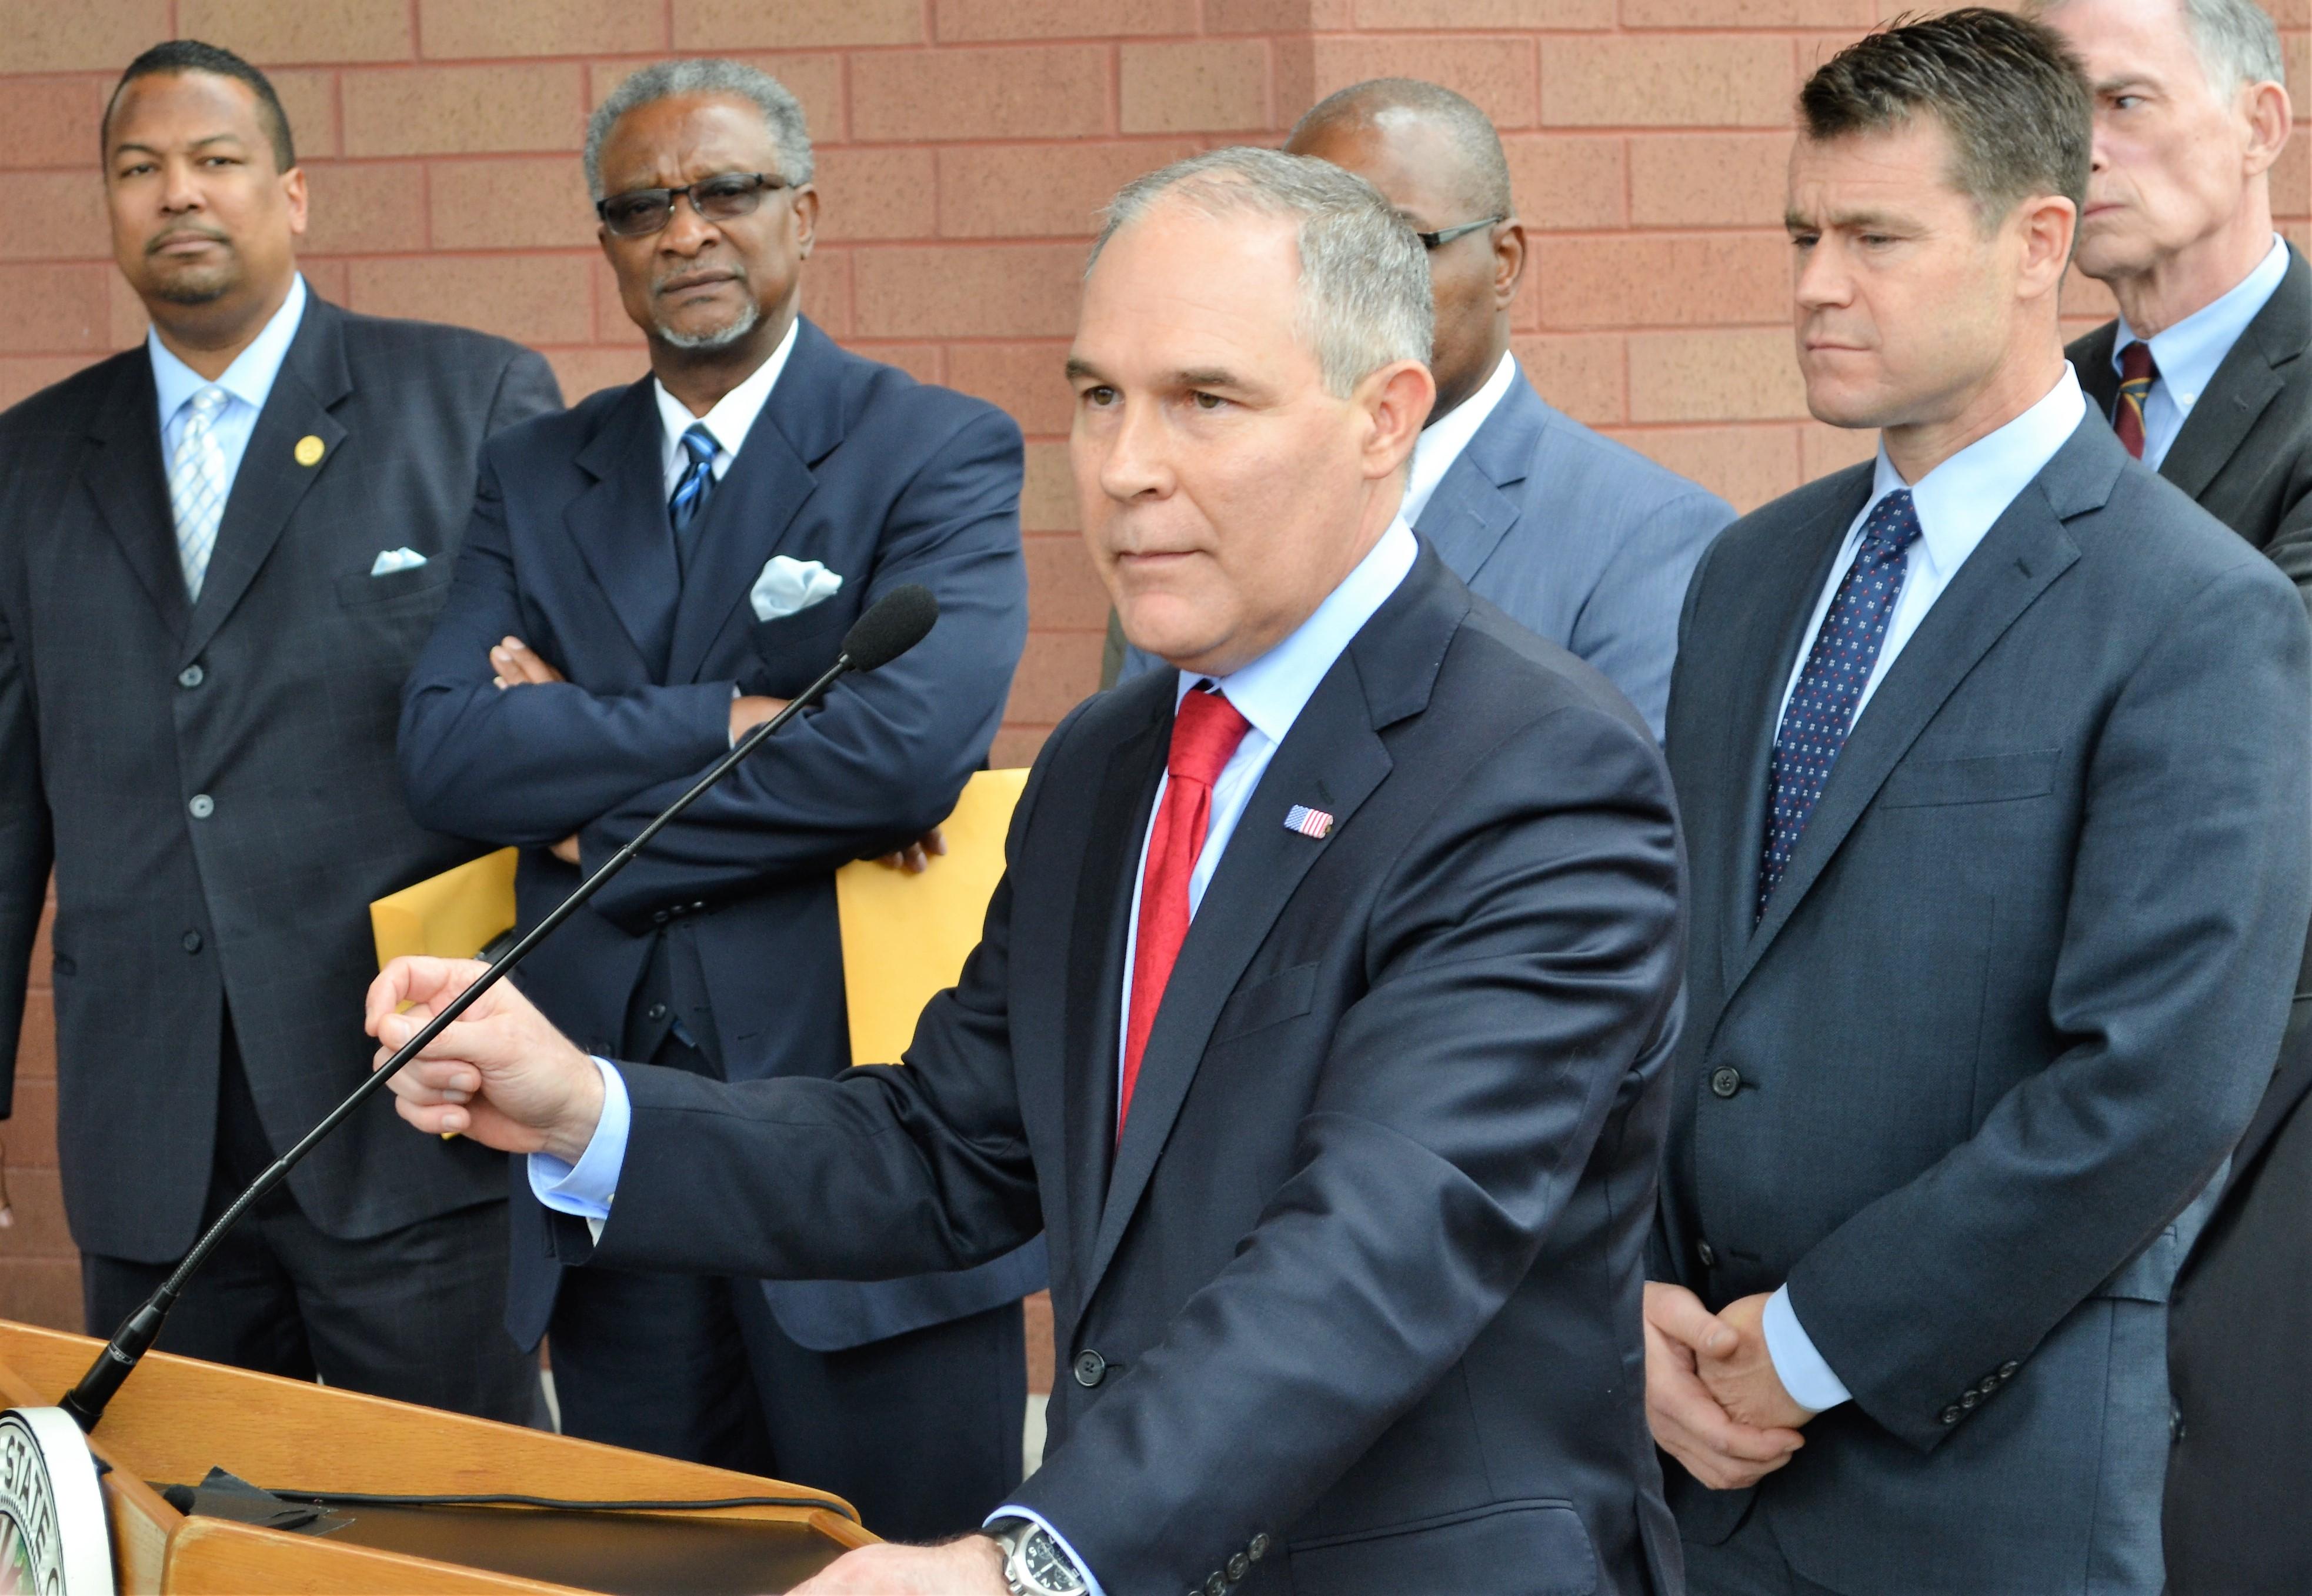 EPA Administrator Scott Pruitt speaks Wednesday after meeting with residents in East Chicago. (Alex Ruppenthal / Chicago Tonight)